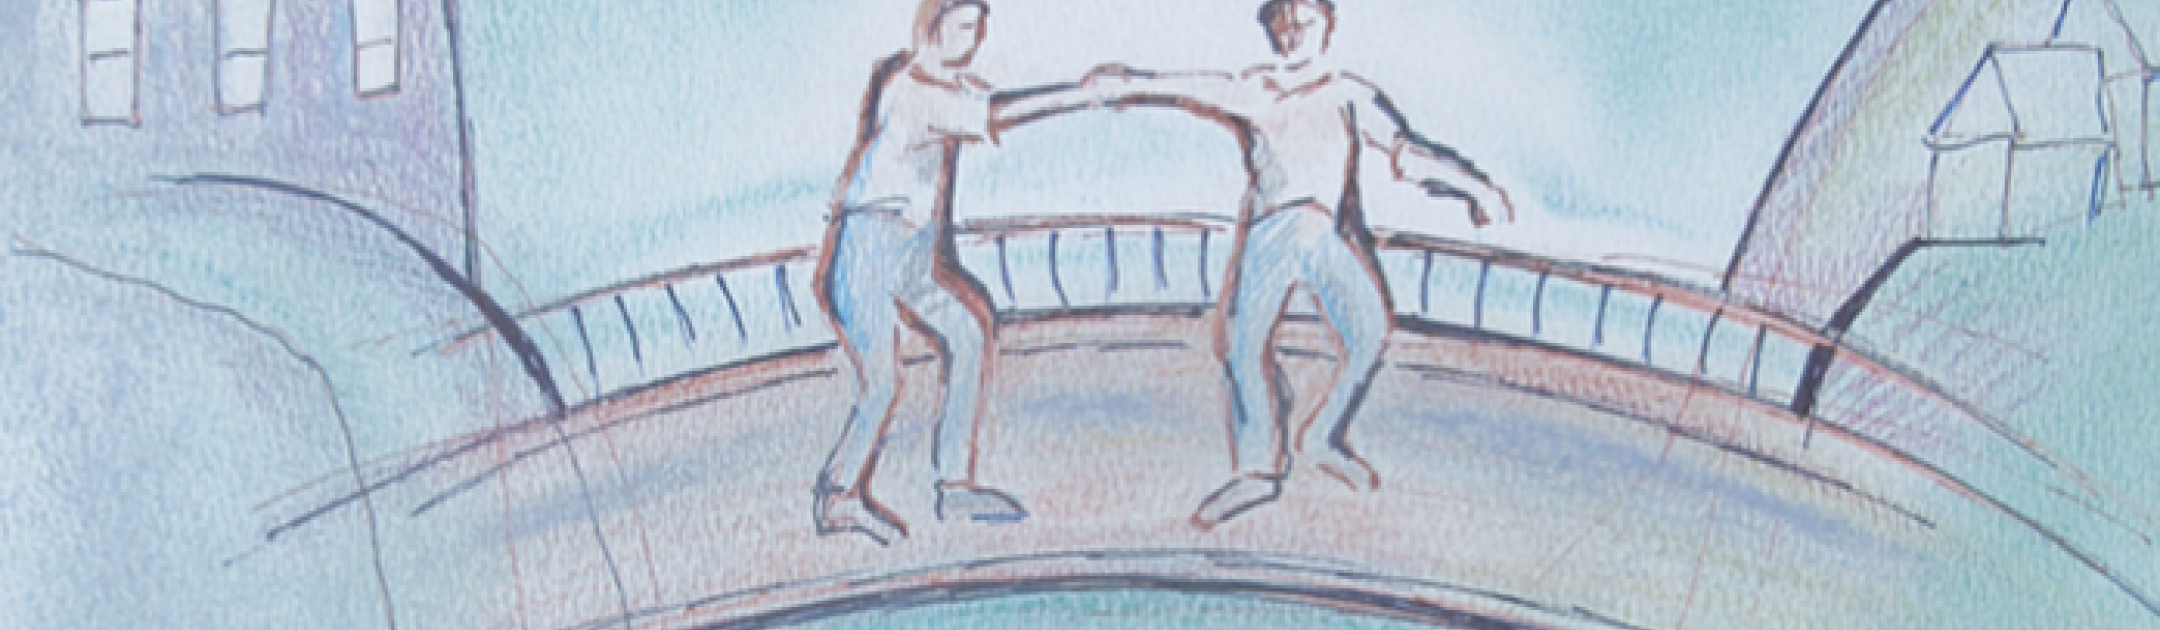 Drawing of two people on a bridge, with a hospital on one side and the community on the other 